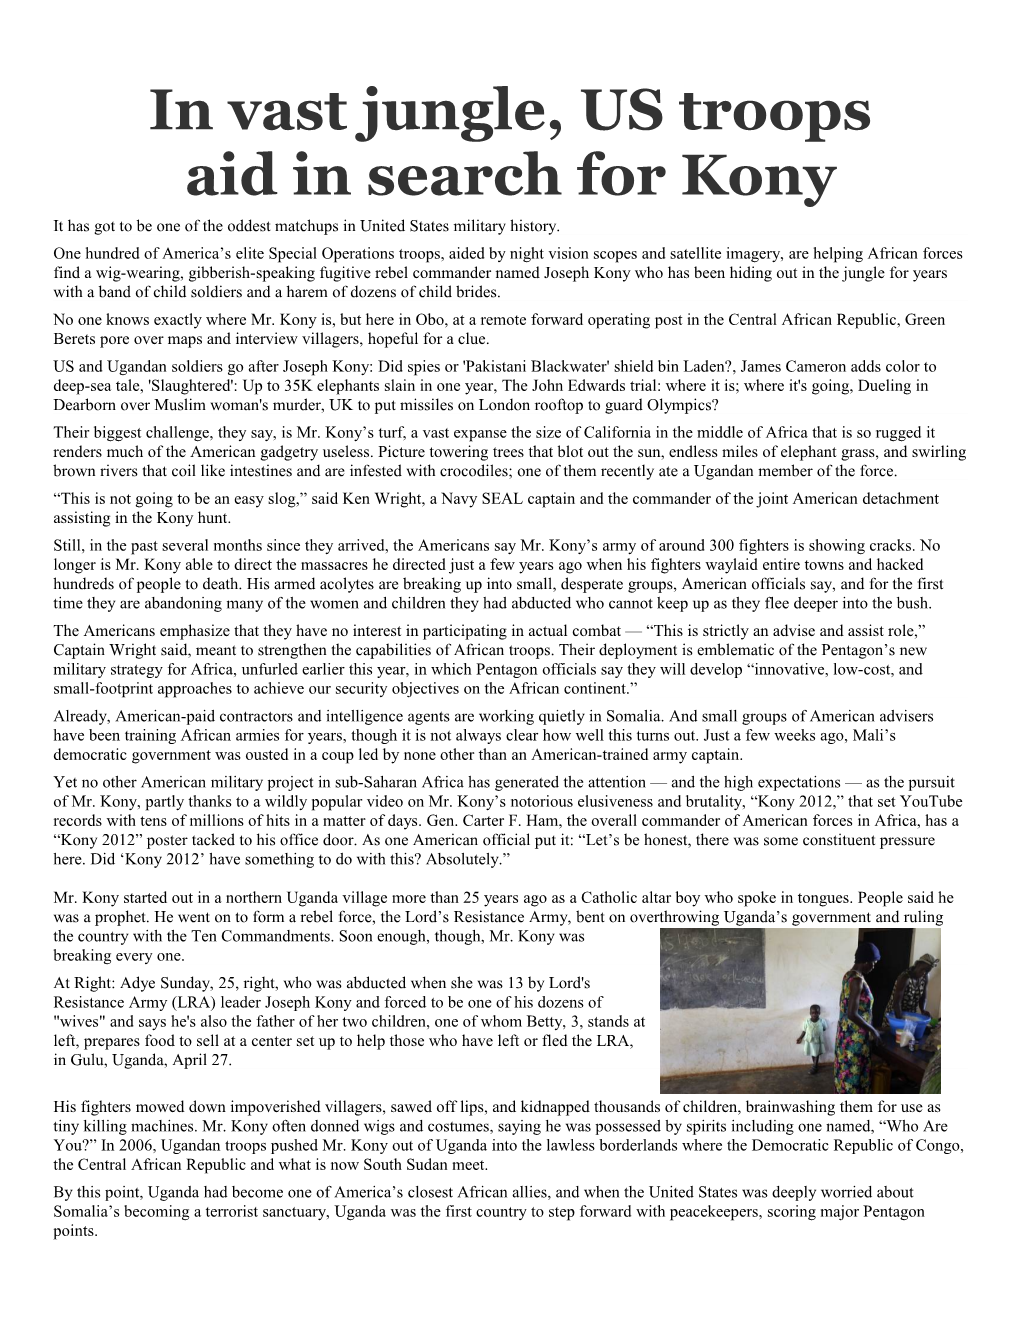 In Vast Jungle, US Troops Aid in Search for Kony